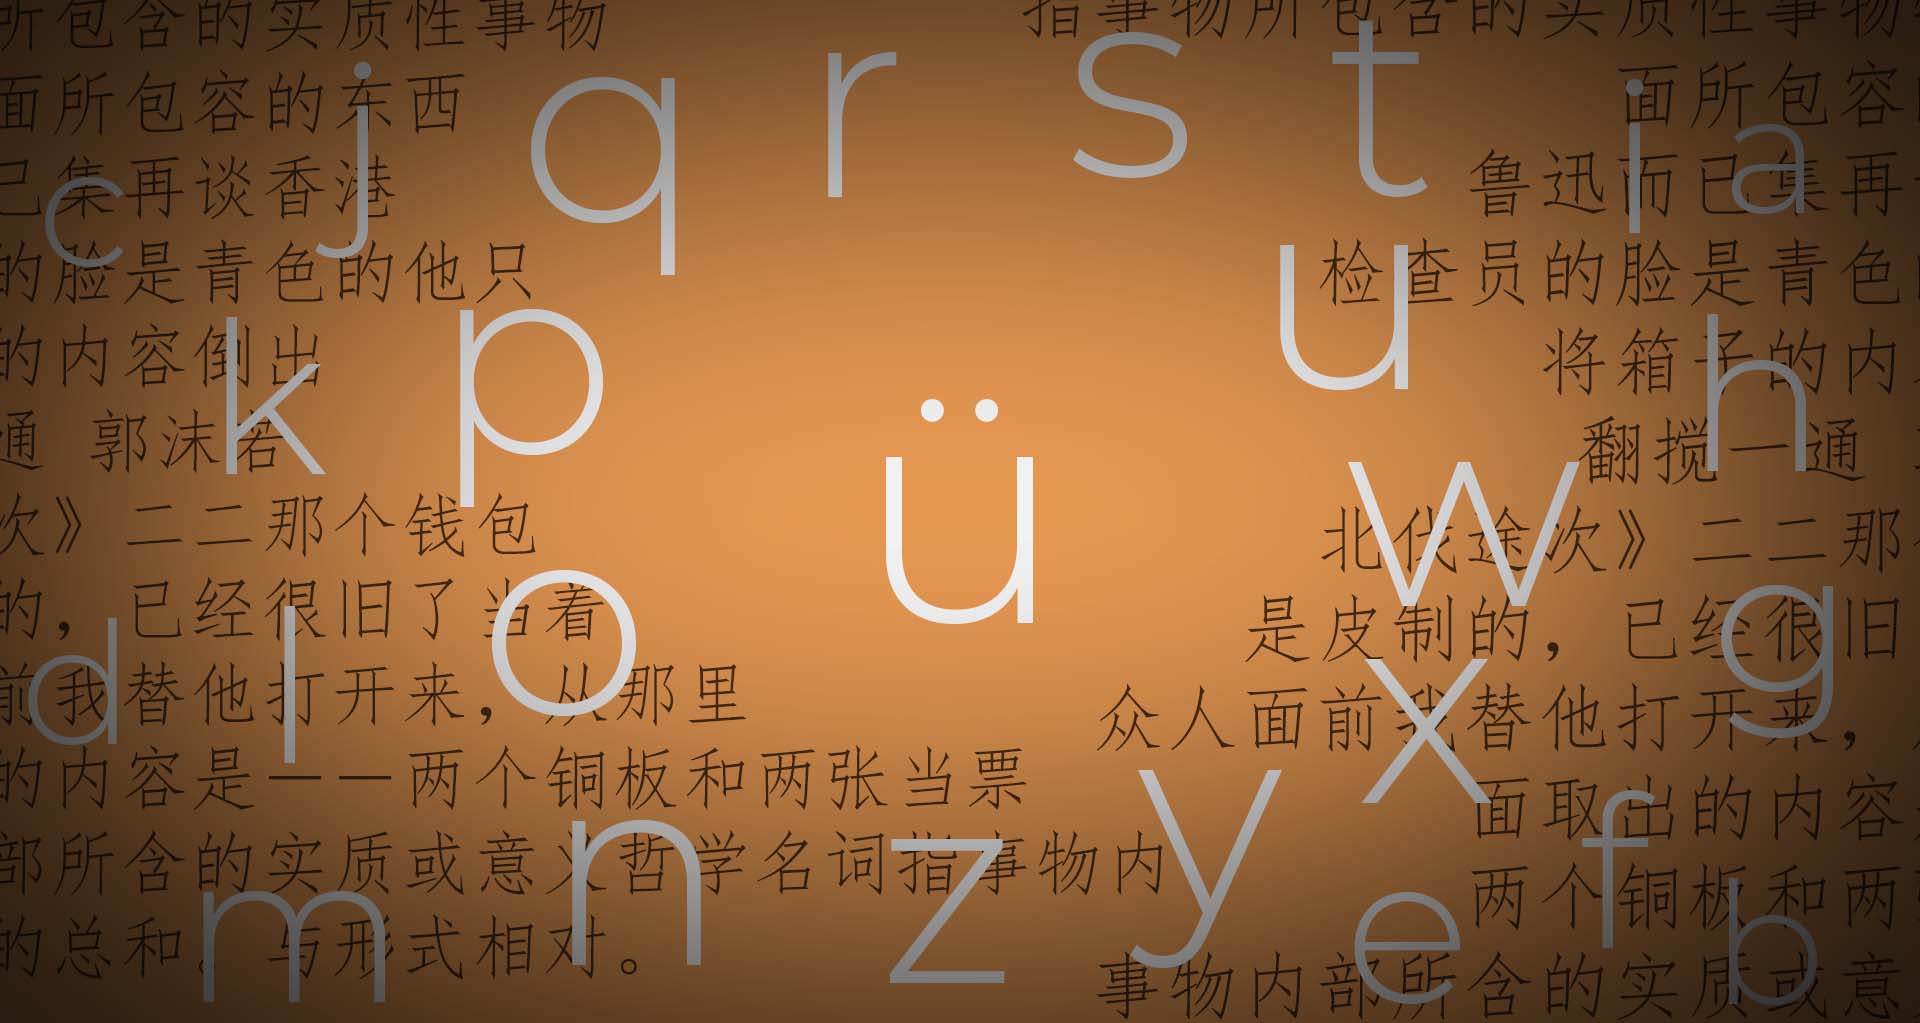 the letter ü highlighted in the middle of the pinyin alphabet